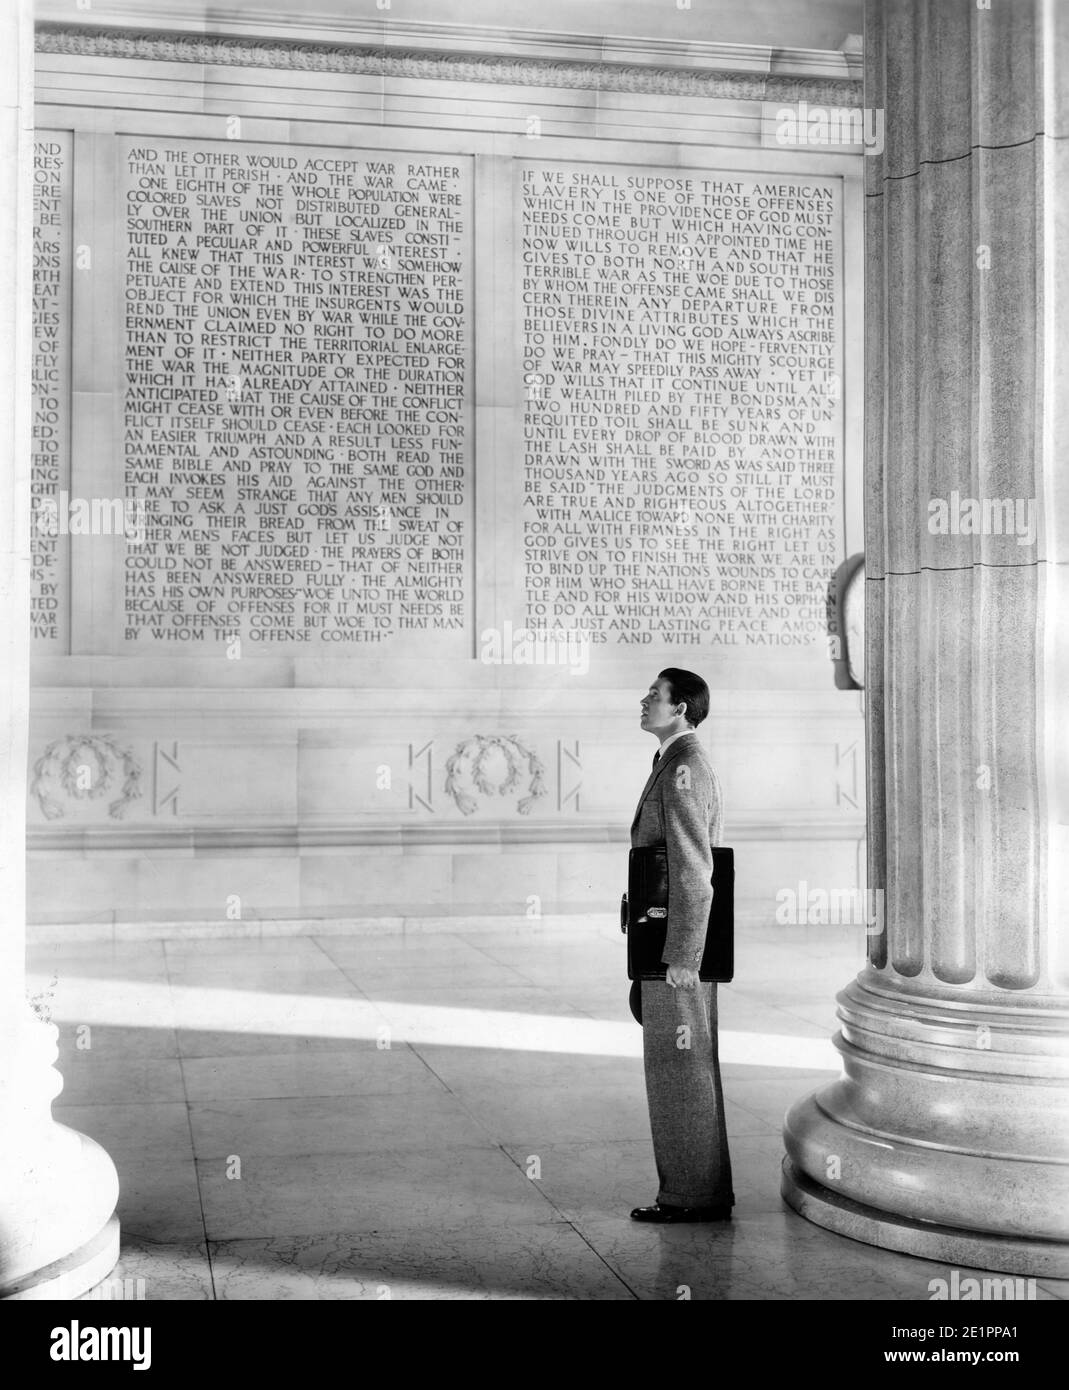 JAMES STEWART as Jefferson Smith at the Lincoln Memorial in Washington in MR. SMITH GOES TO WASHINGTON 1939 director FRANK CAPRA story Lewis R. Foster screenplay Sidney Buchman Columbia Pictures Stock Photo